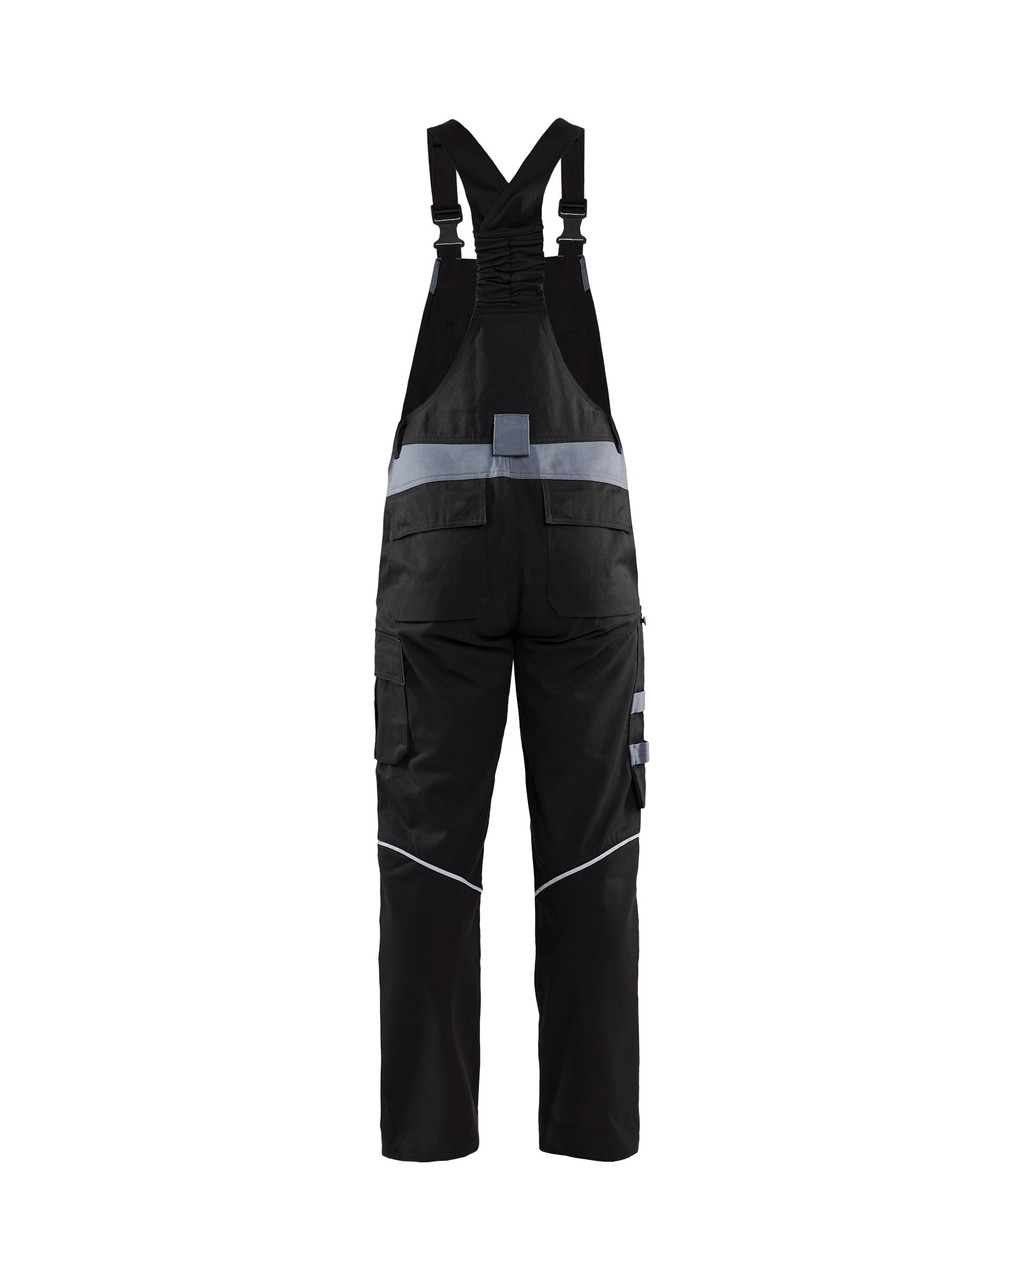 Buy online in Australia and New Zealand BLAKLADER Overalls  for Electricians that are comfortable and durable.